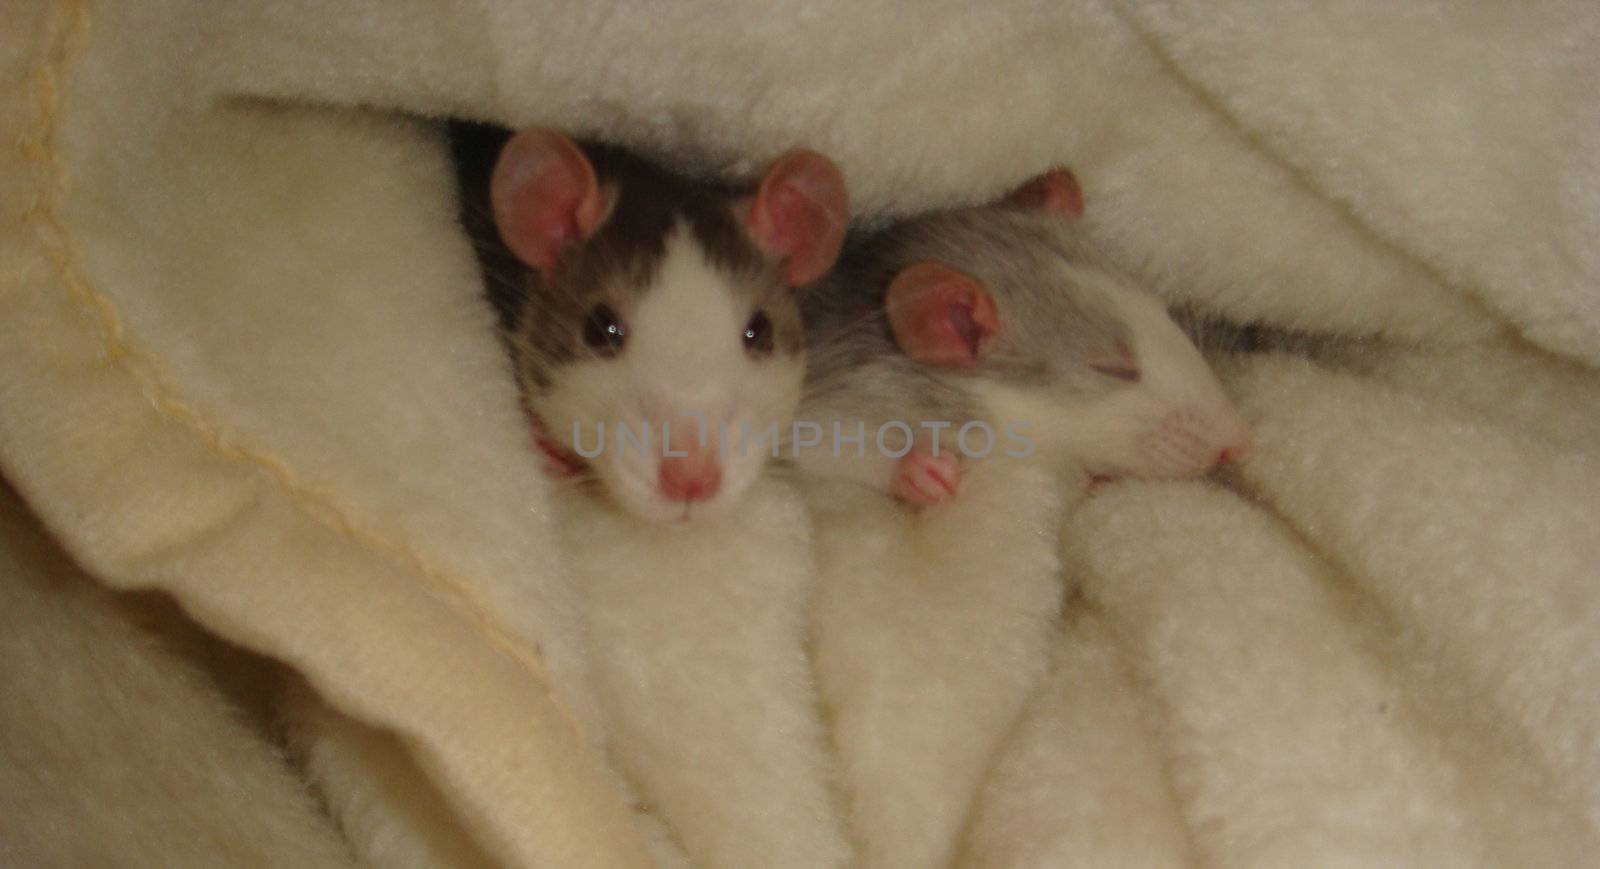 Two rats in a blanket.